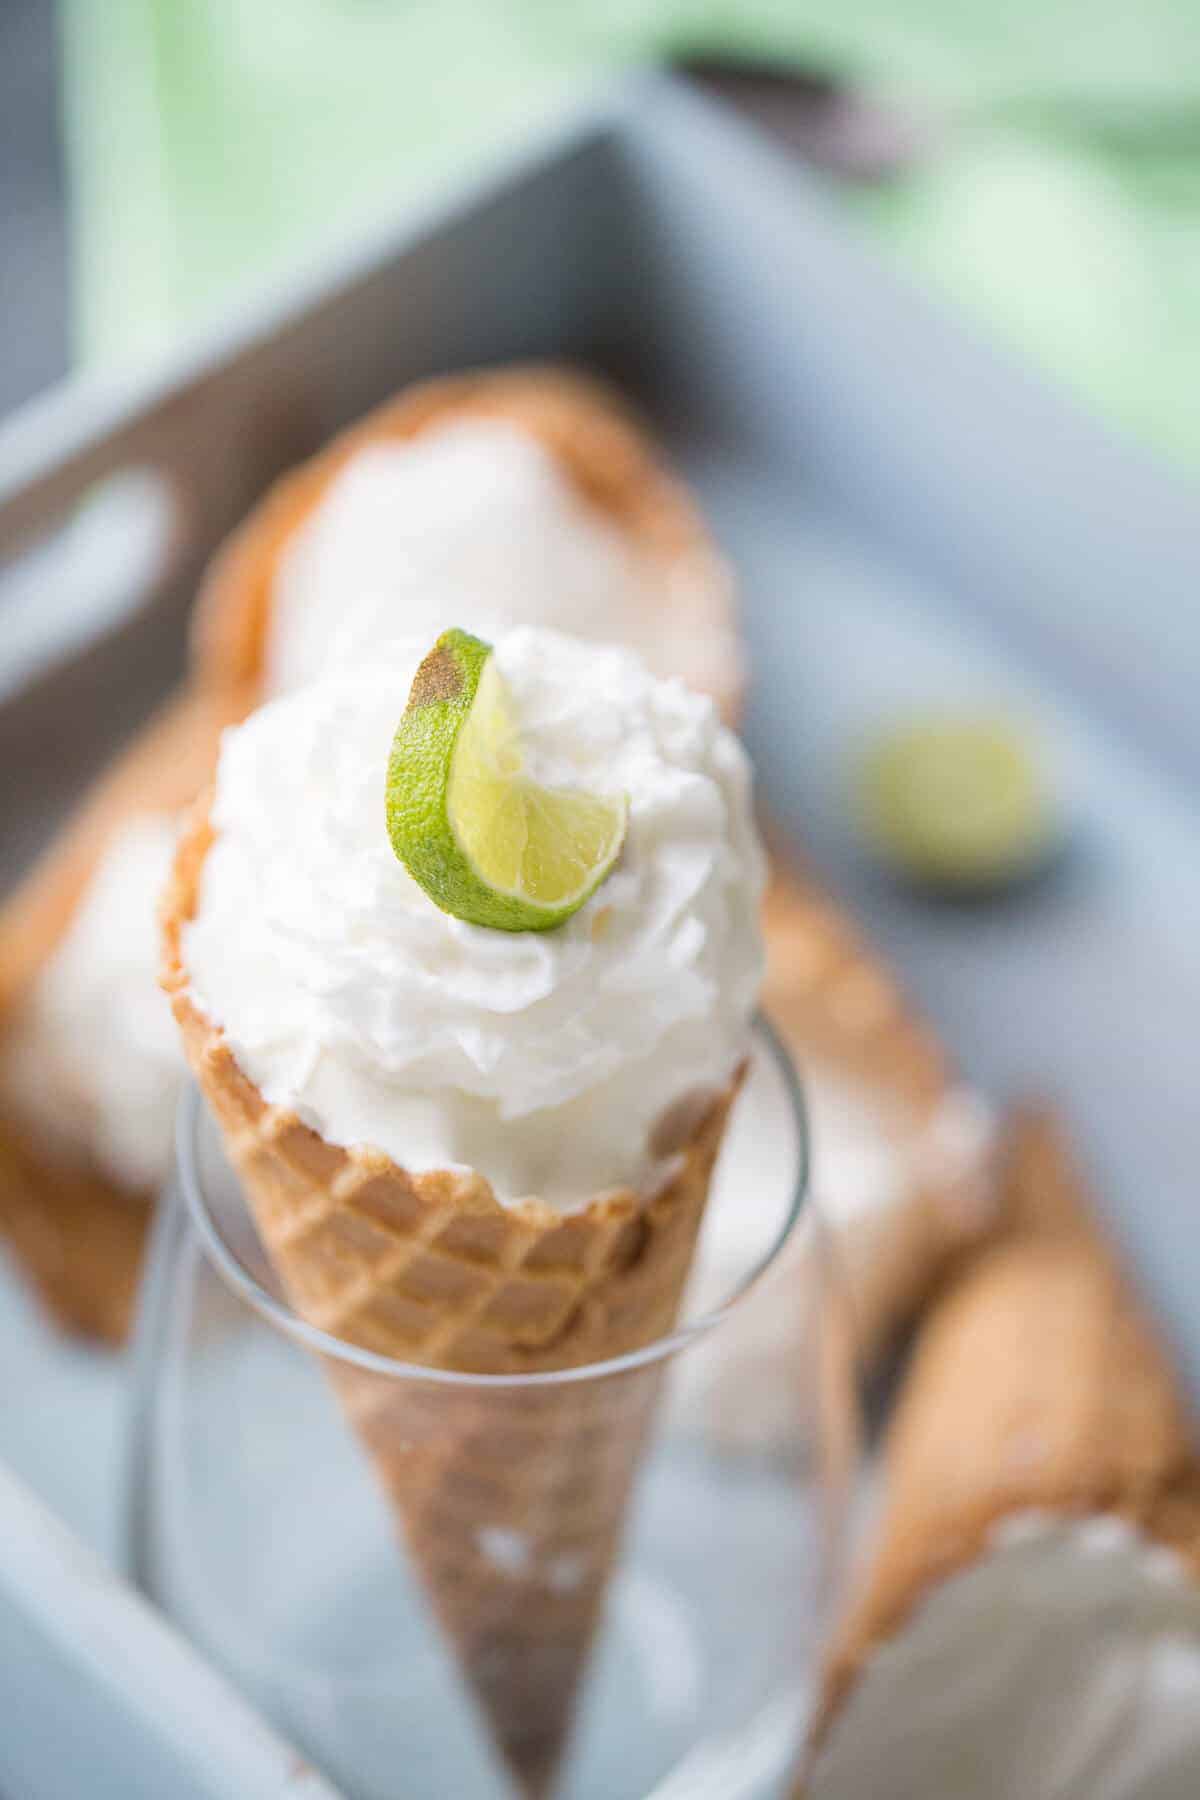 Frozen Key Lime Pie is the perfect summer time treat! The waffle cone makes it fun to eat!